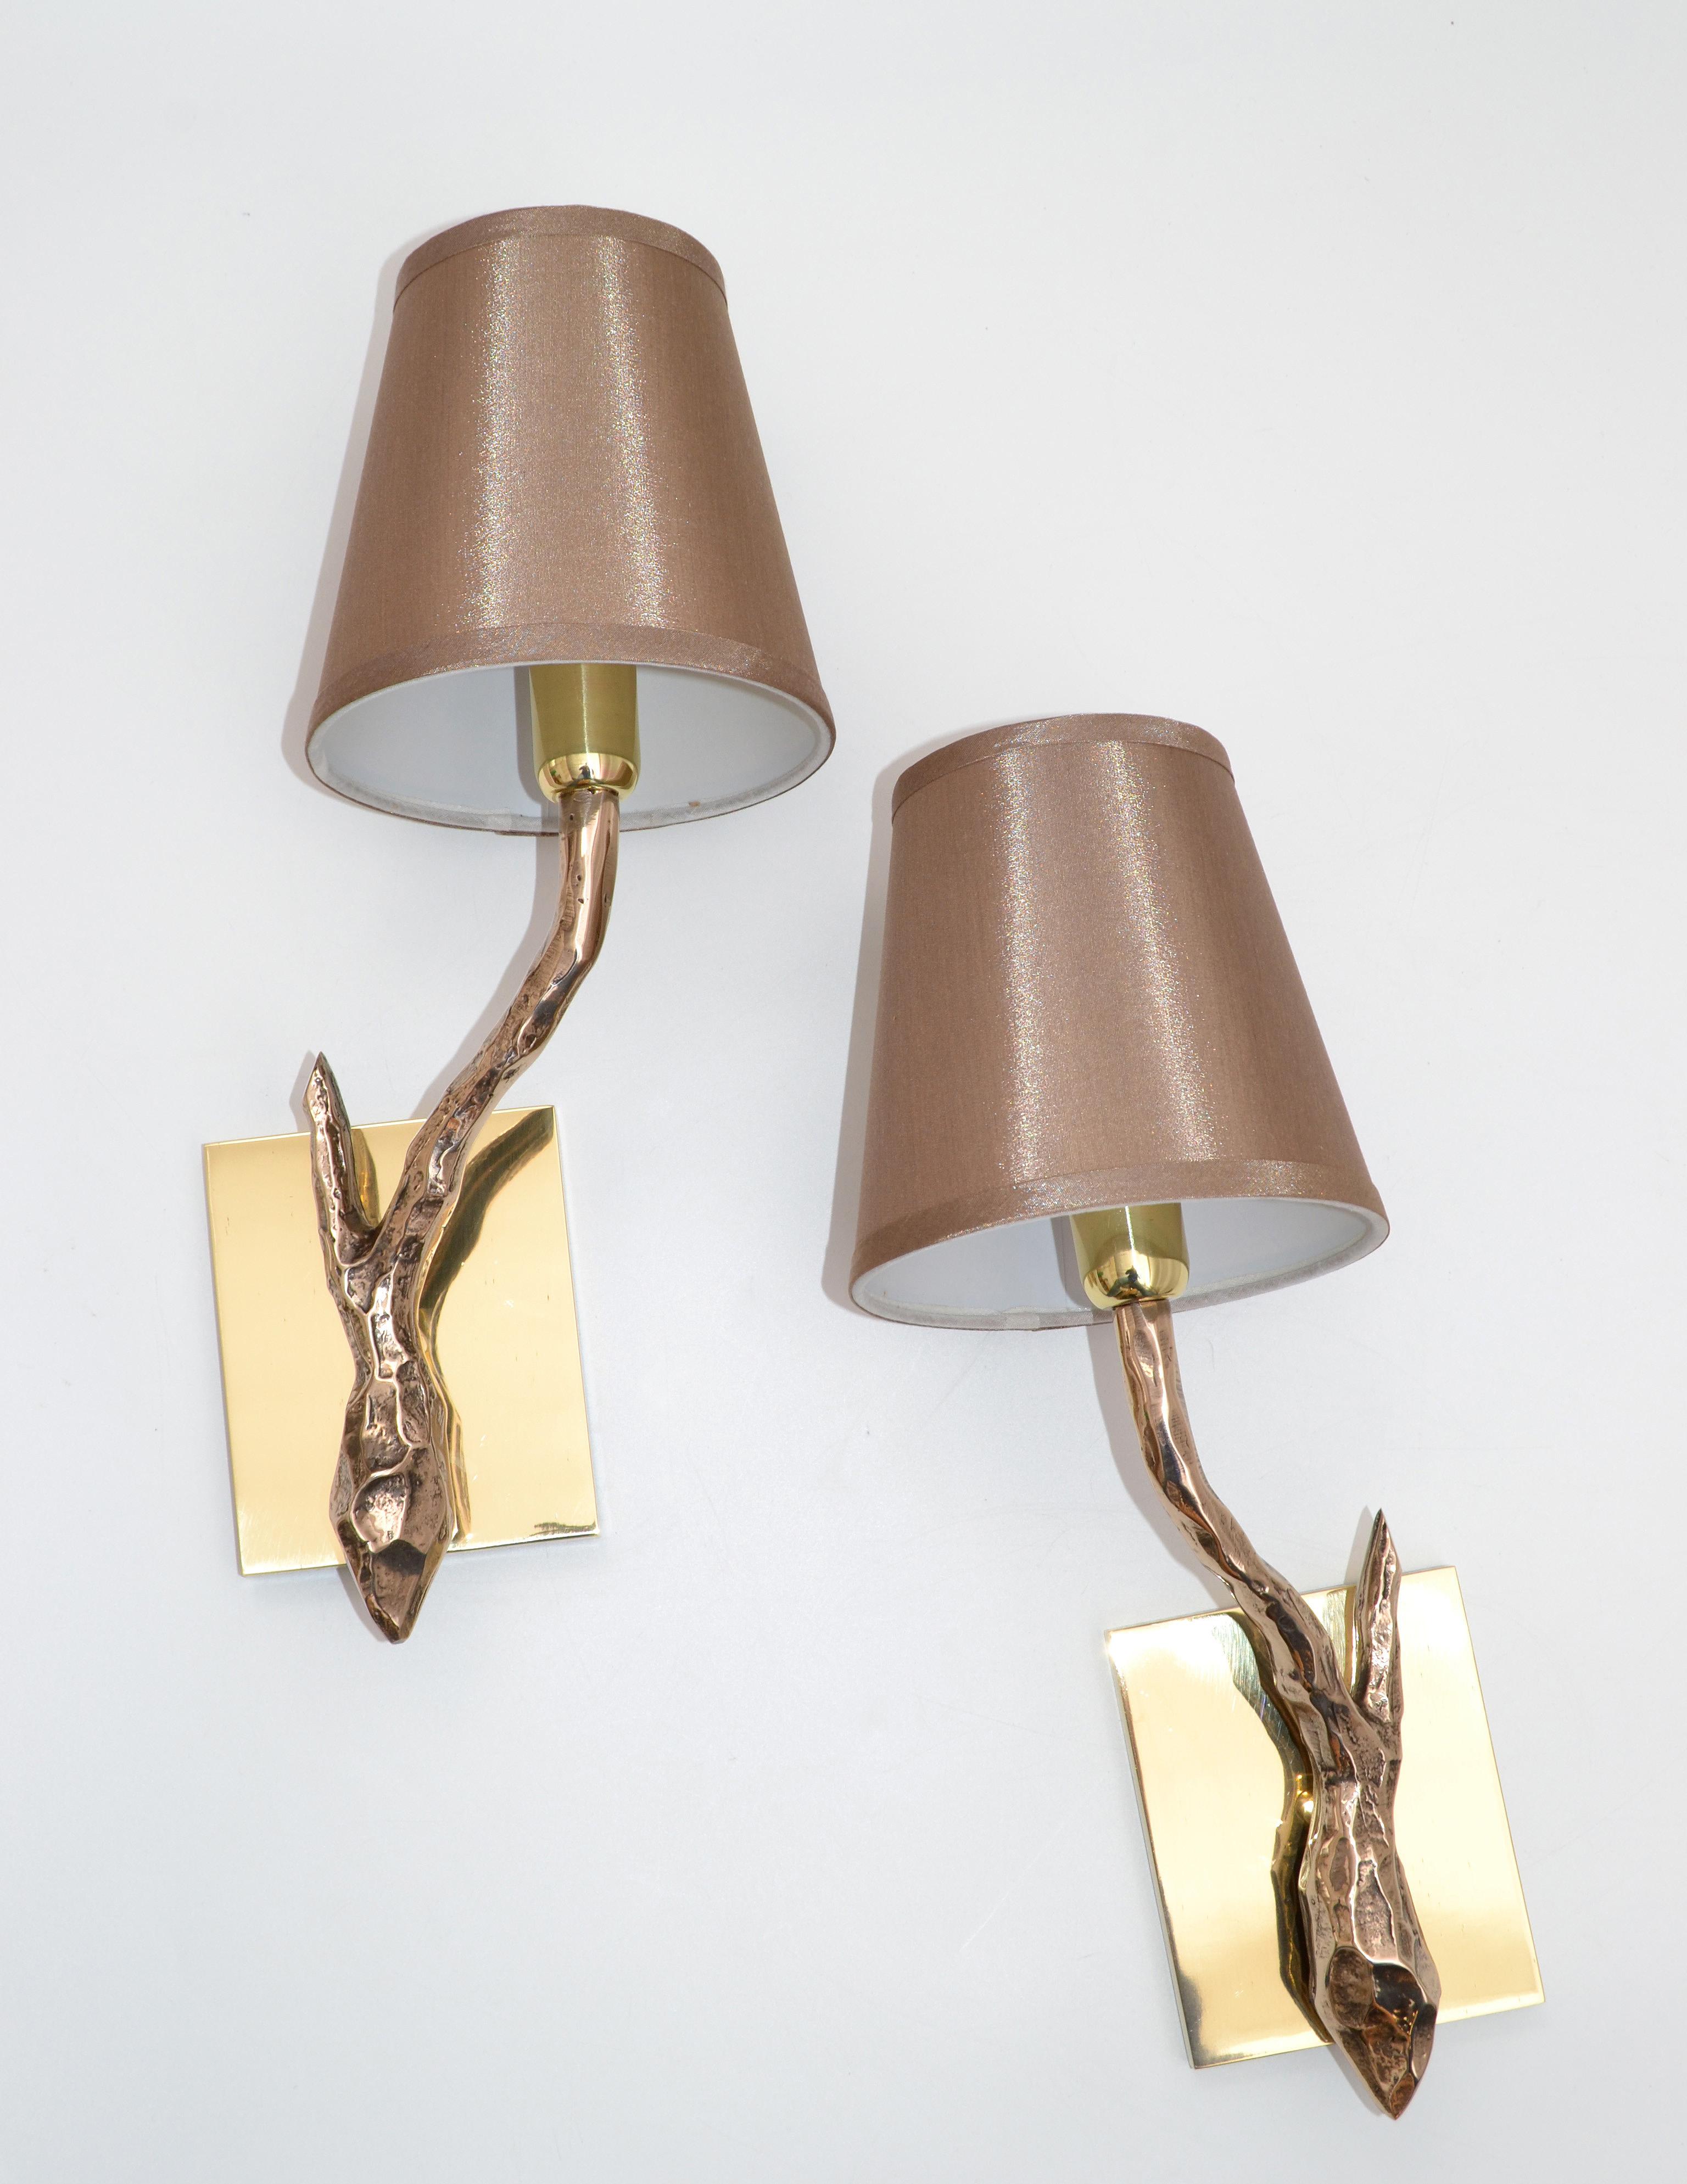 Polished Pair of Agostini Style Sconces Bronze with Gold Metallic Shades, France, 1950s For Sale